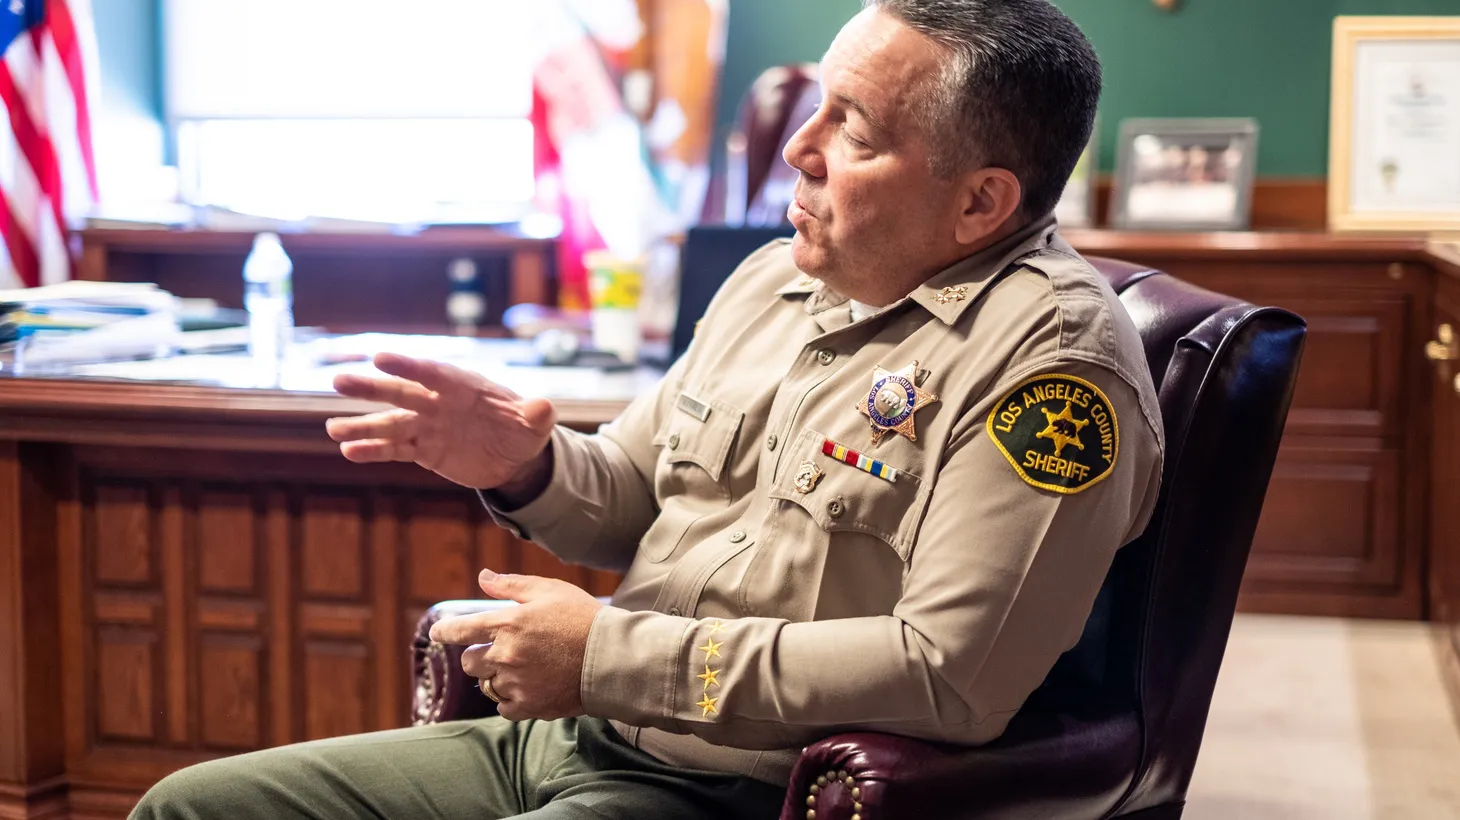 LA Sheriff Alex Villanueva has faced immense scrutiny over the last four years over denying the existence of deputy gangs and a series of misconduct among his rank-and-file.